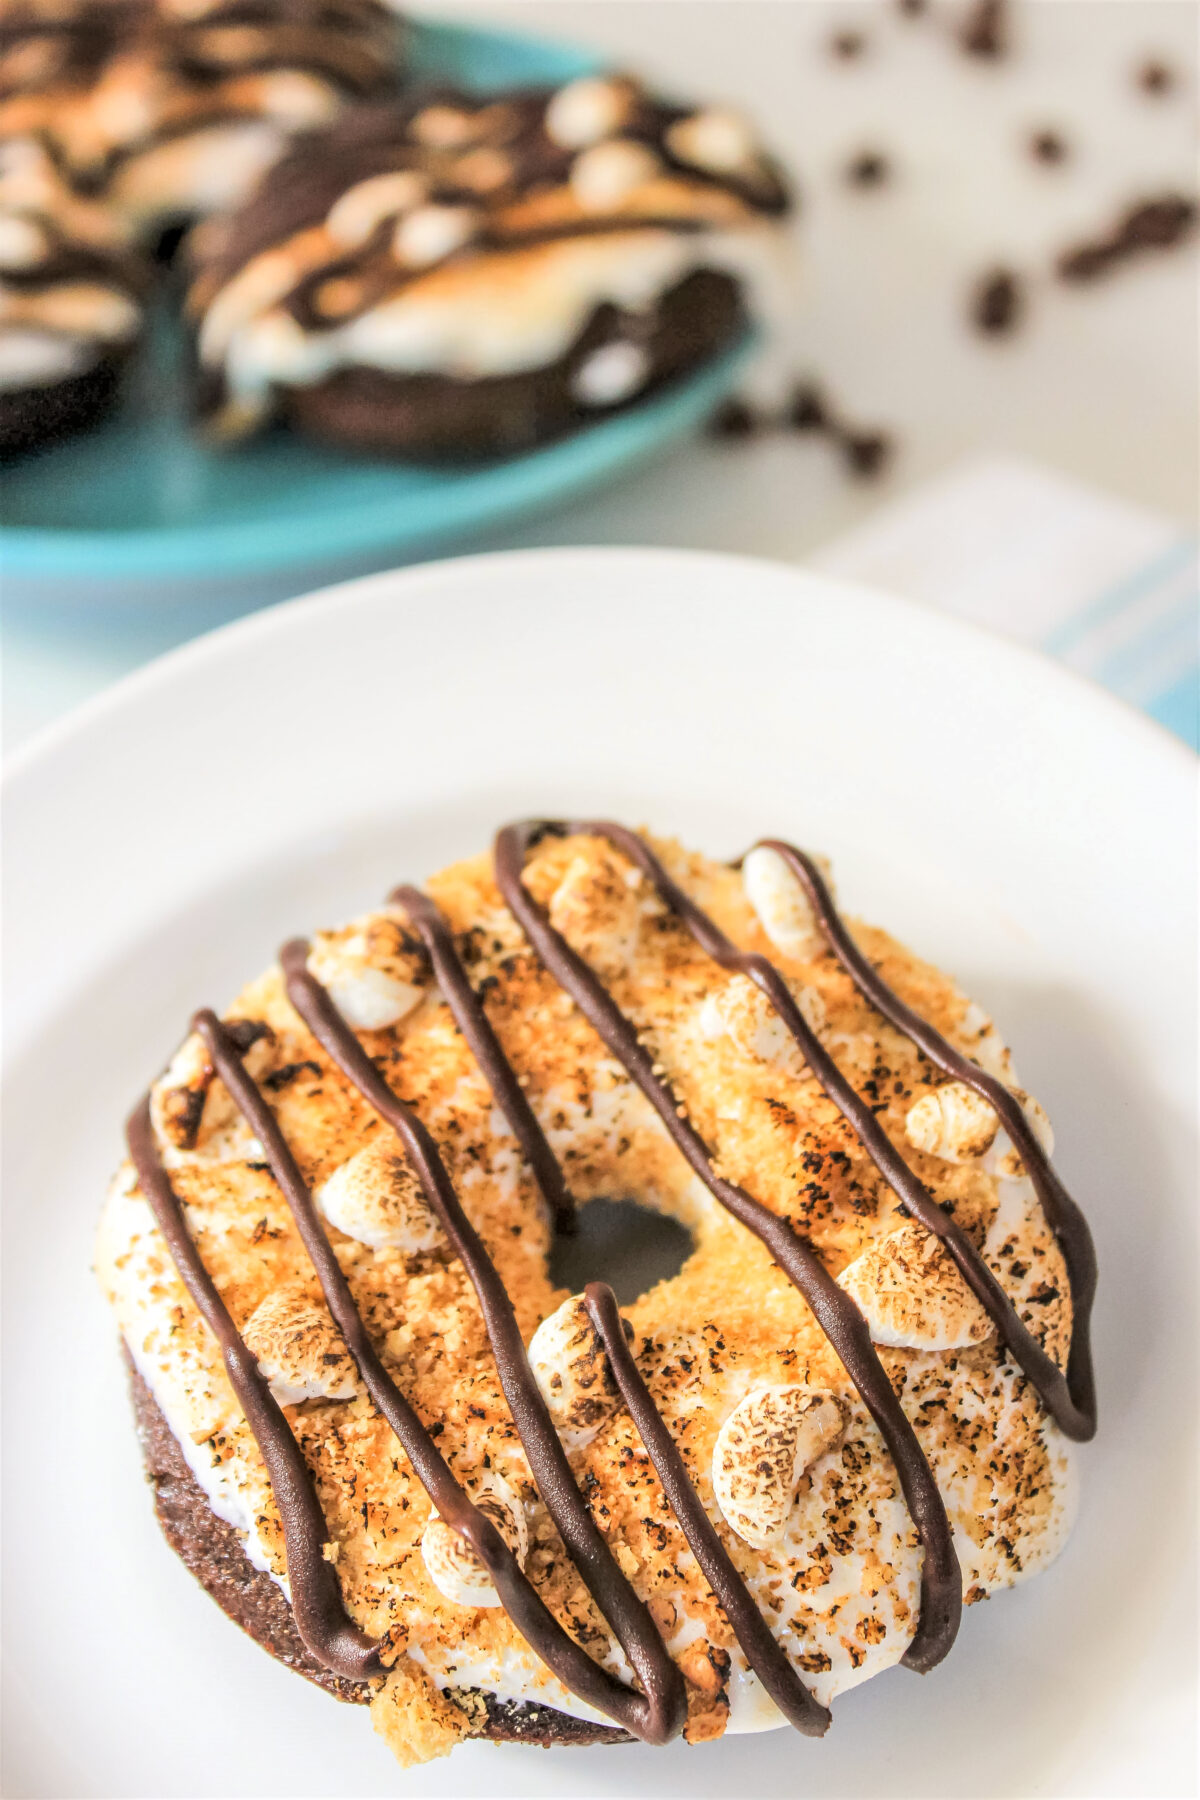 Indulge in your summer camp memories with these delicious s'mores chocolate donuts! They're perfect for a sweet snack or dessert.